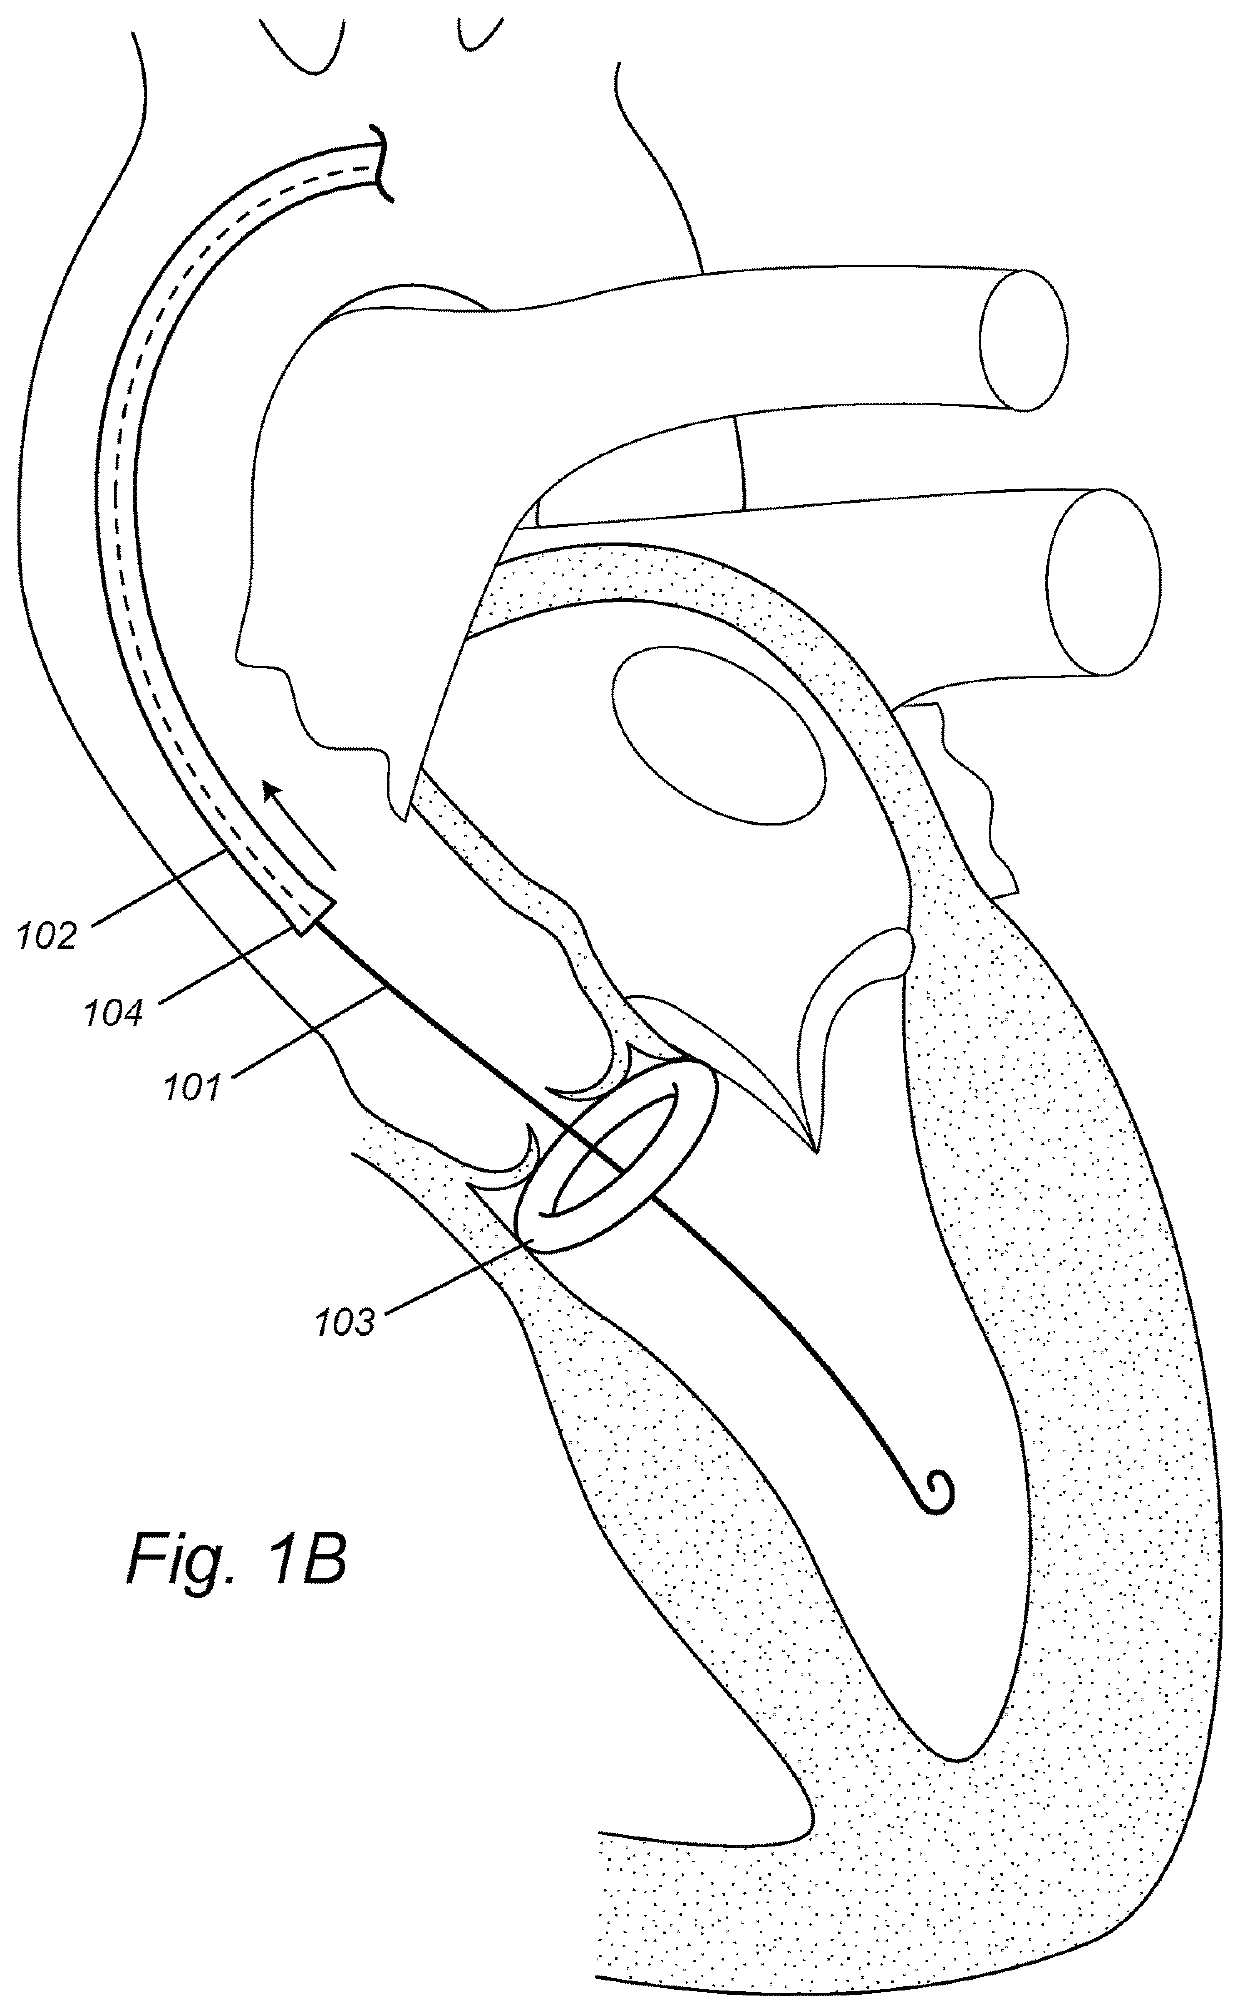 Devices, systems, and methods to optimize annular orientation of transcatheter valves